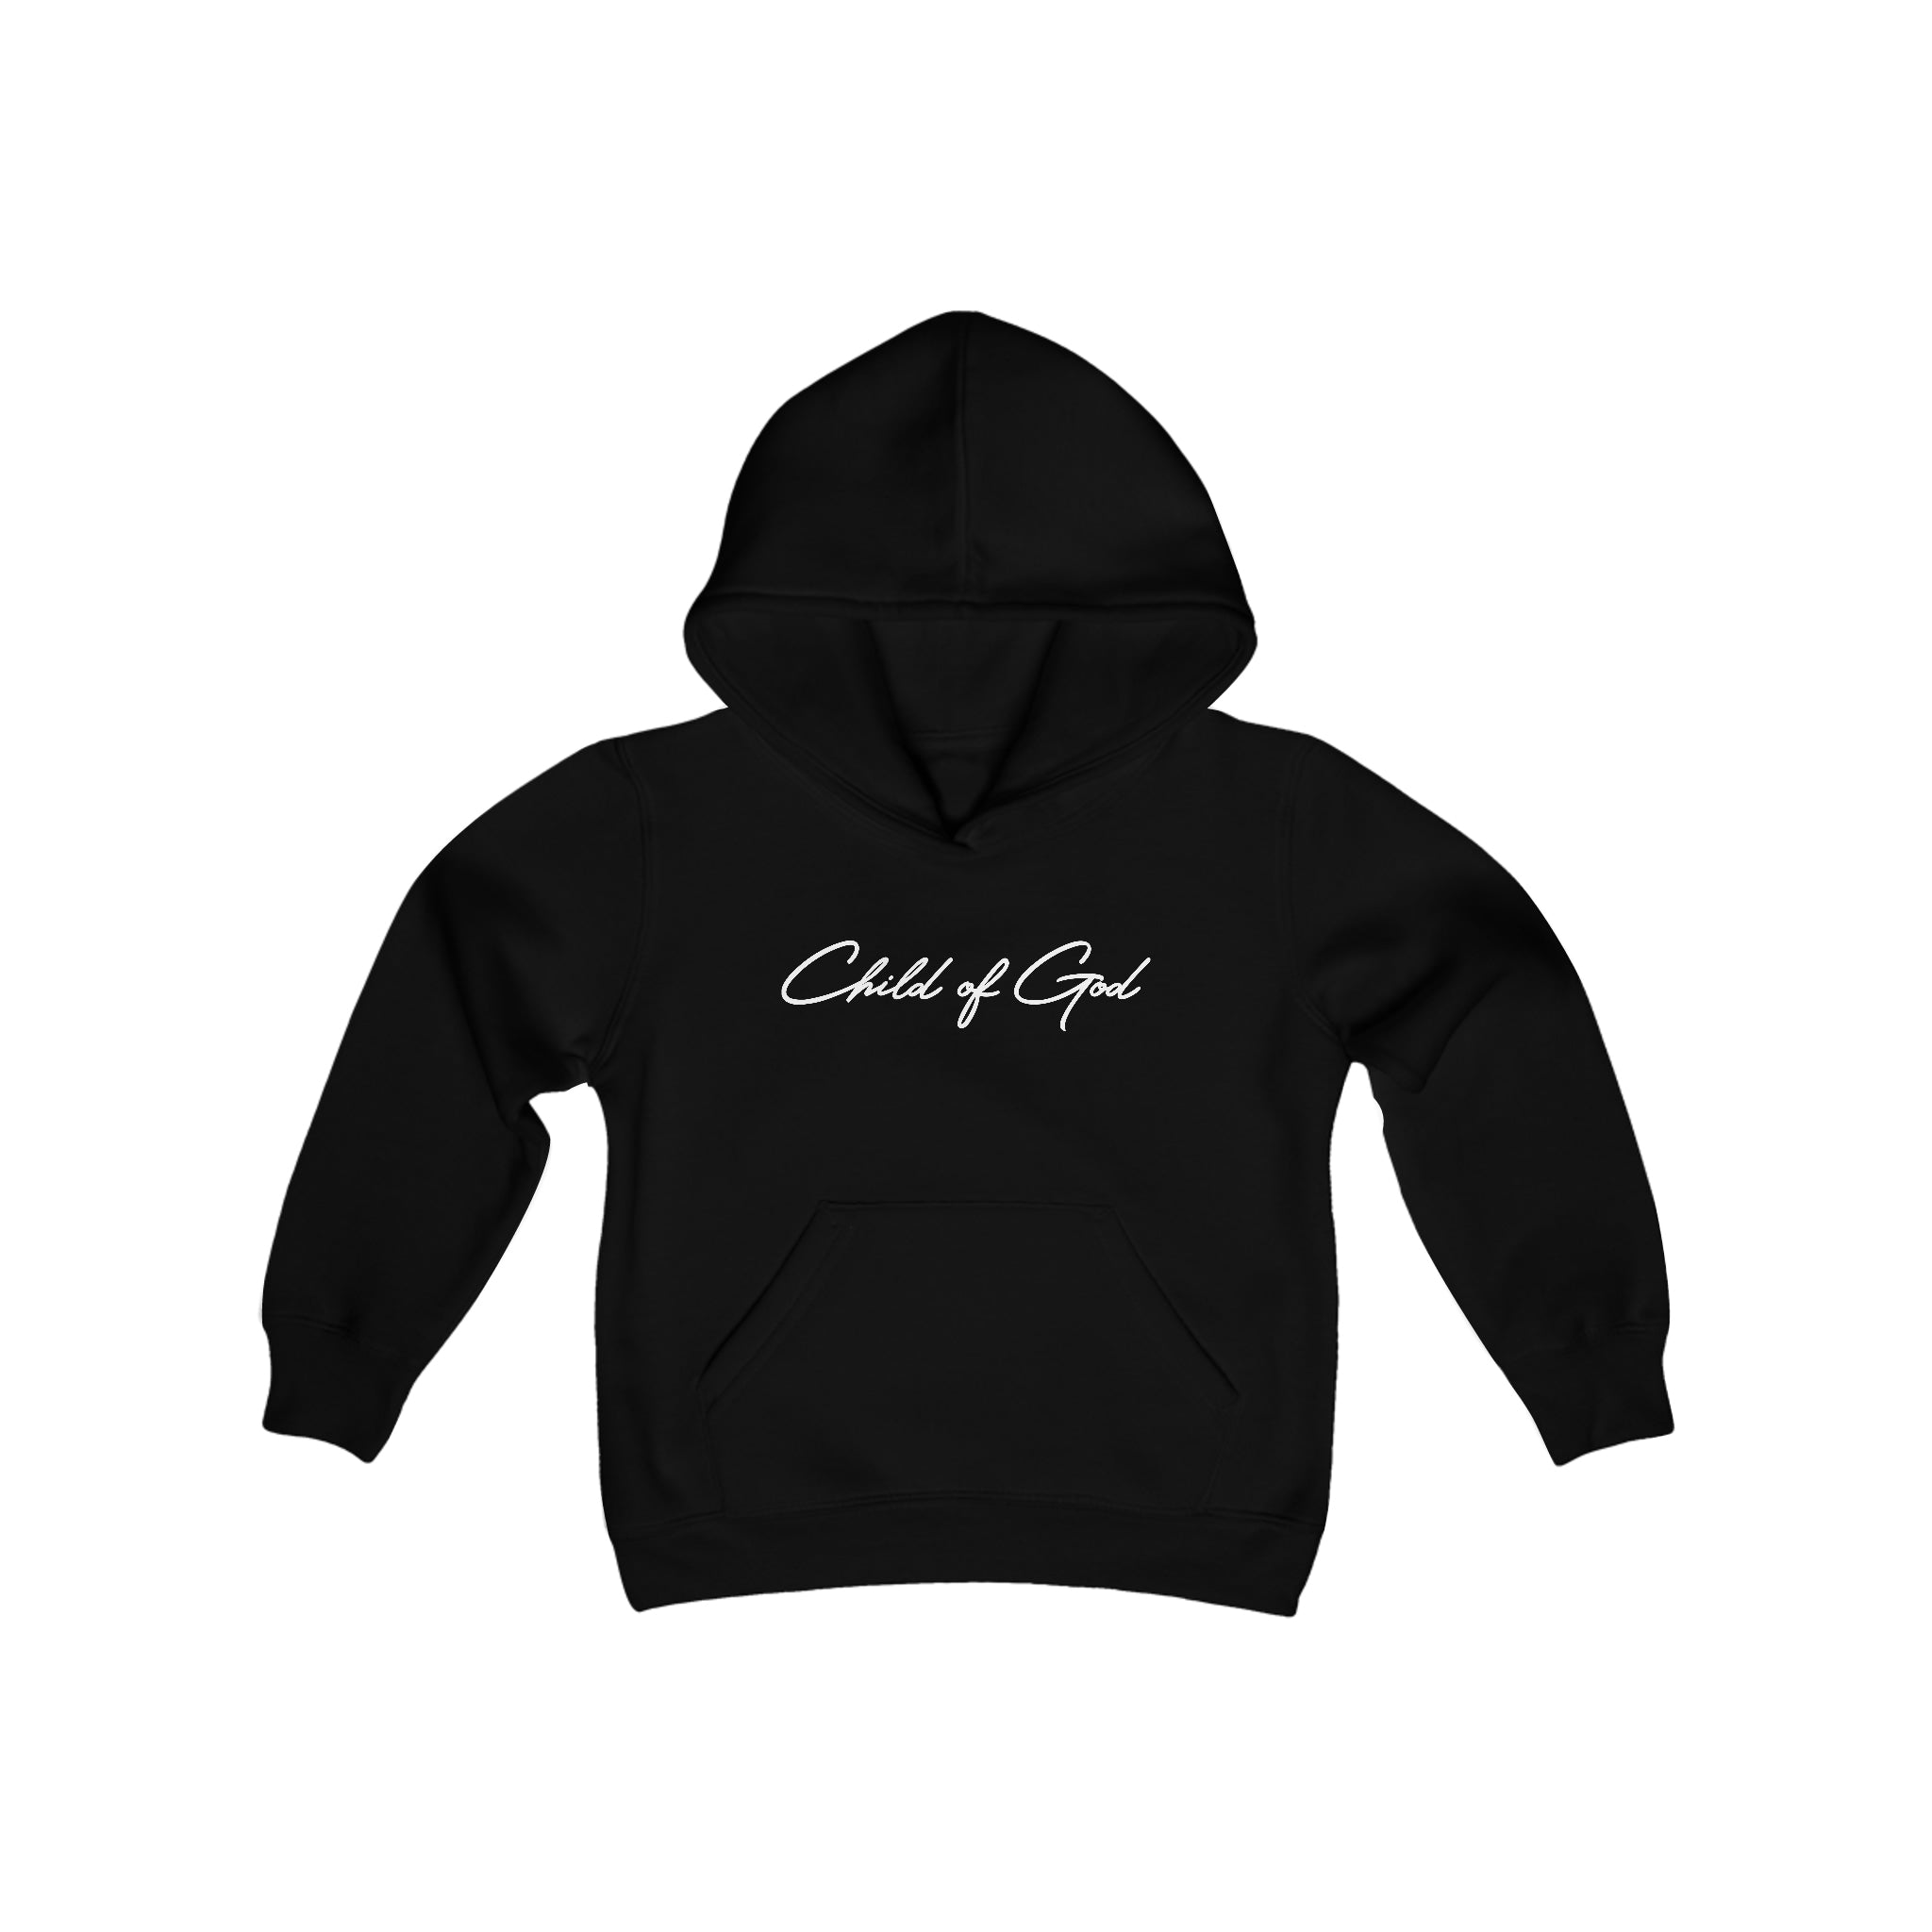 Classic Design Youth Heavy Blend Hooded Sweatshirt - Child of God Project